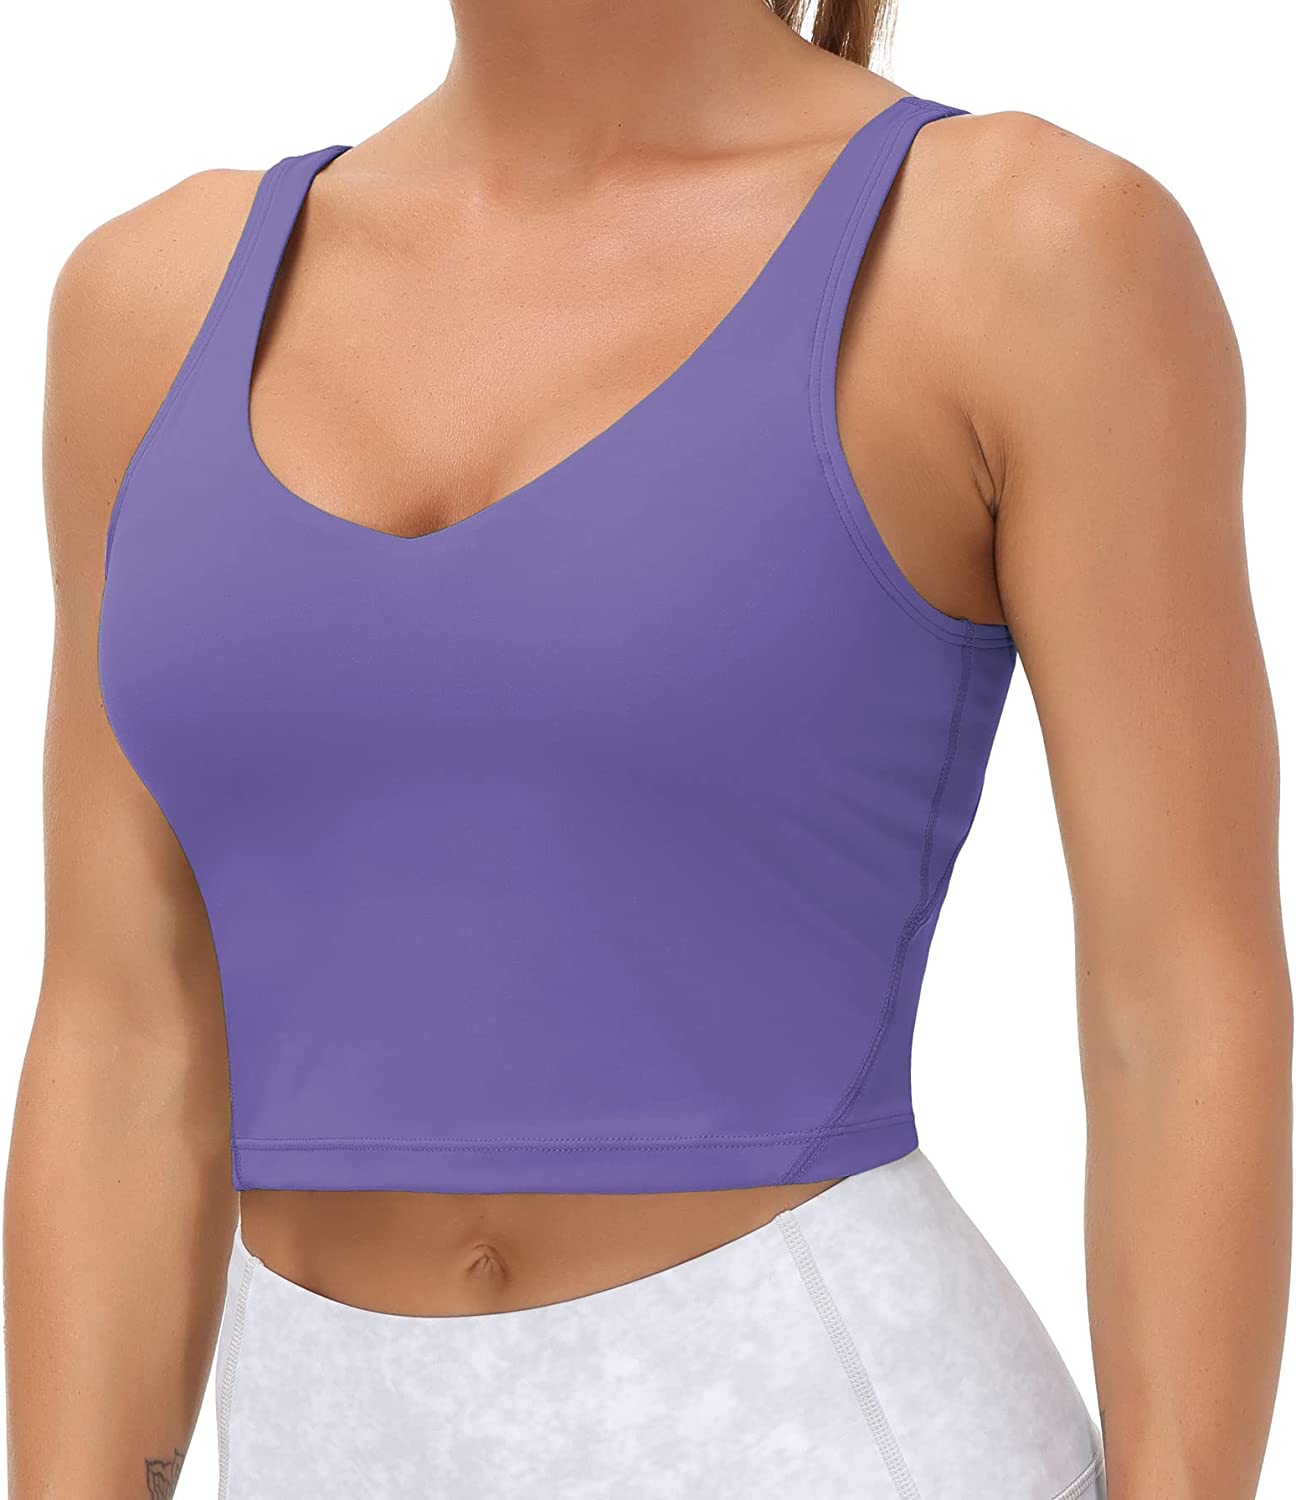 THE GYM PEOPLE Women's Long line Sports Bra Wire free Padded